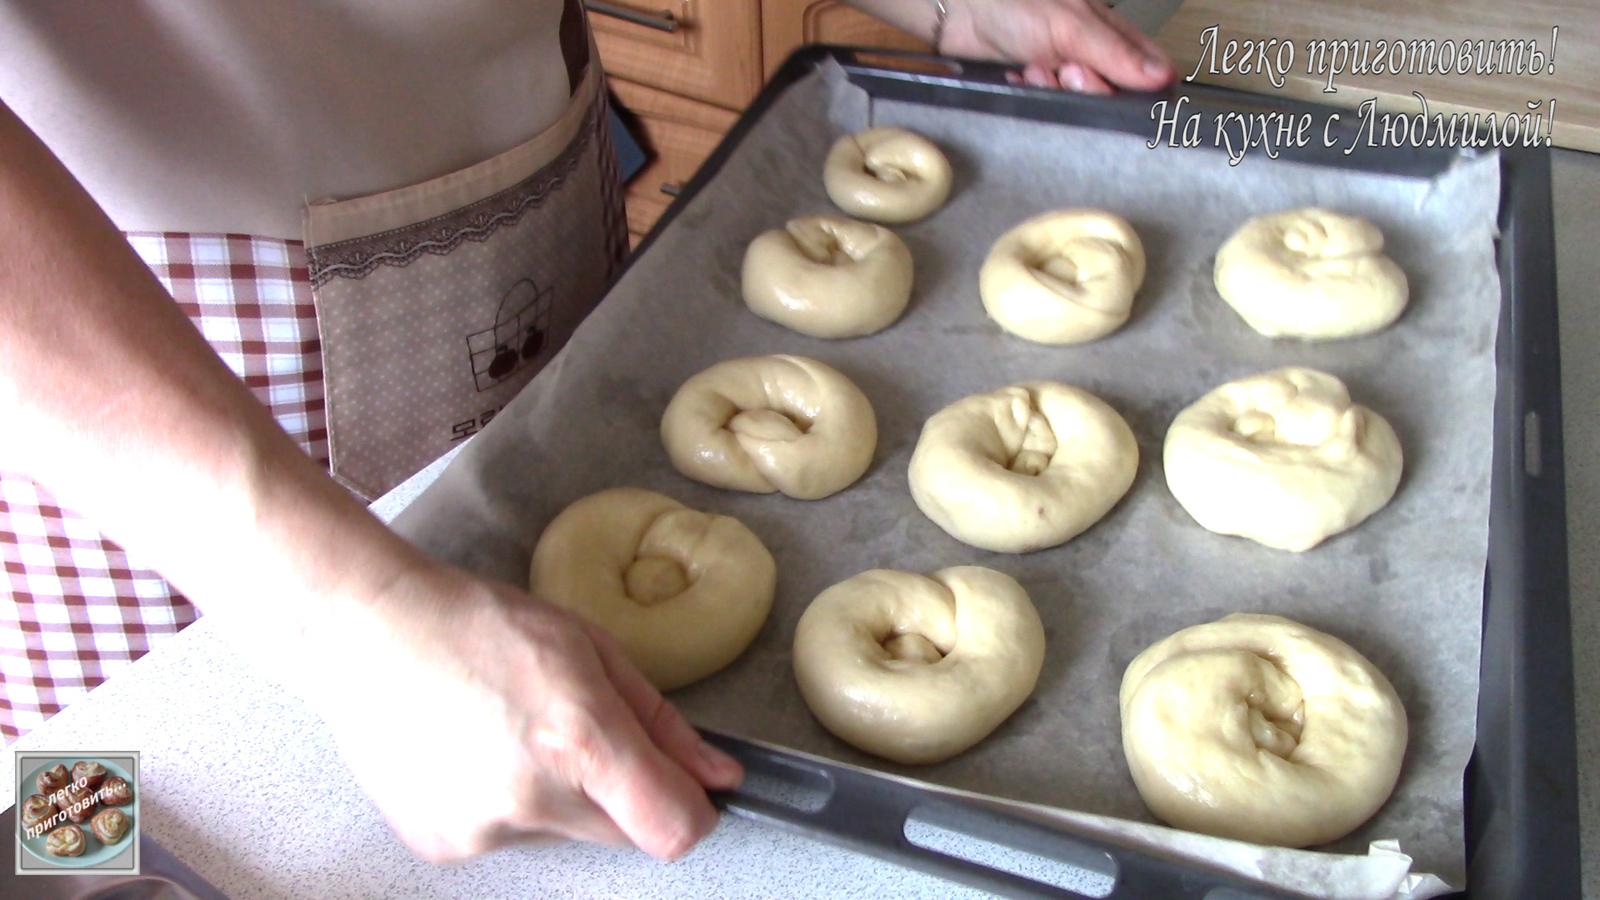 Buns with apples - My, Buns, Food, Cooking, Recipe, Video, Apples, Dough, Bakery products, Apple pie, Longpost